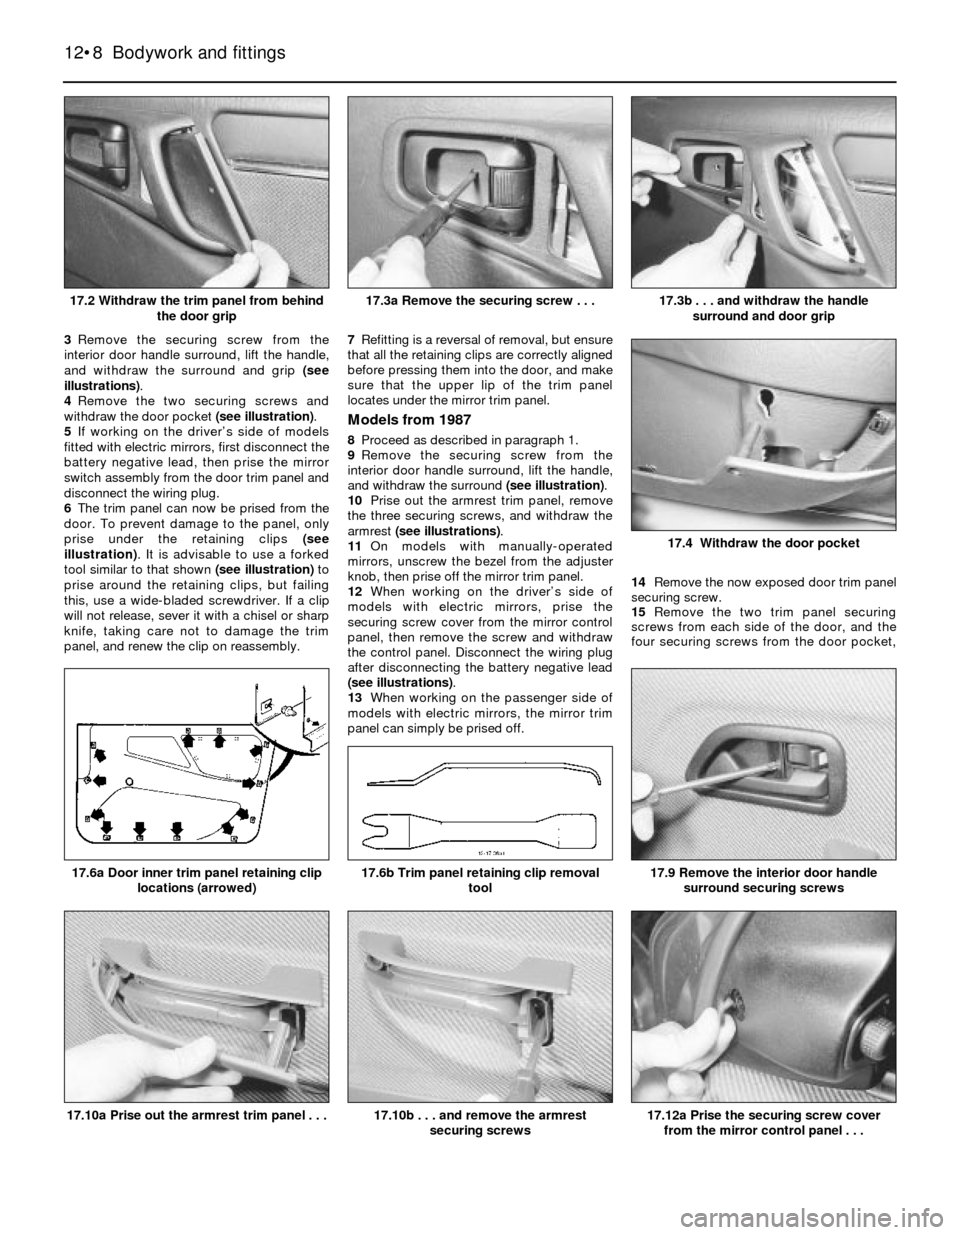 FORD SIERRA 1987 2.G Bodywork And Fittings Workshop Manual 3Remove the securing screw from the
interior door handle surround, lift the handle,
and withdraw the surround and grip (see
illustrations).
4Remove the two securing screws and
withdraw the door pocket